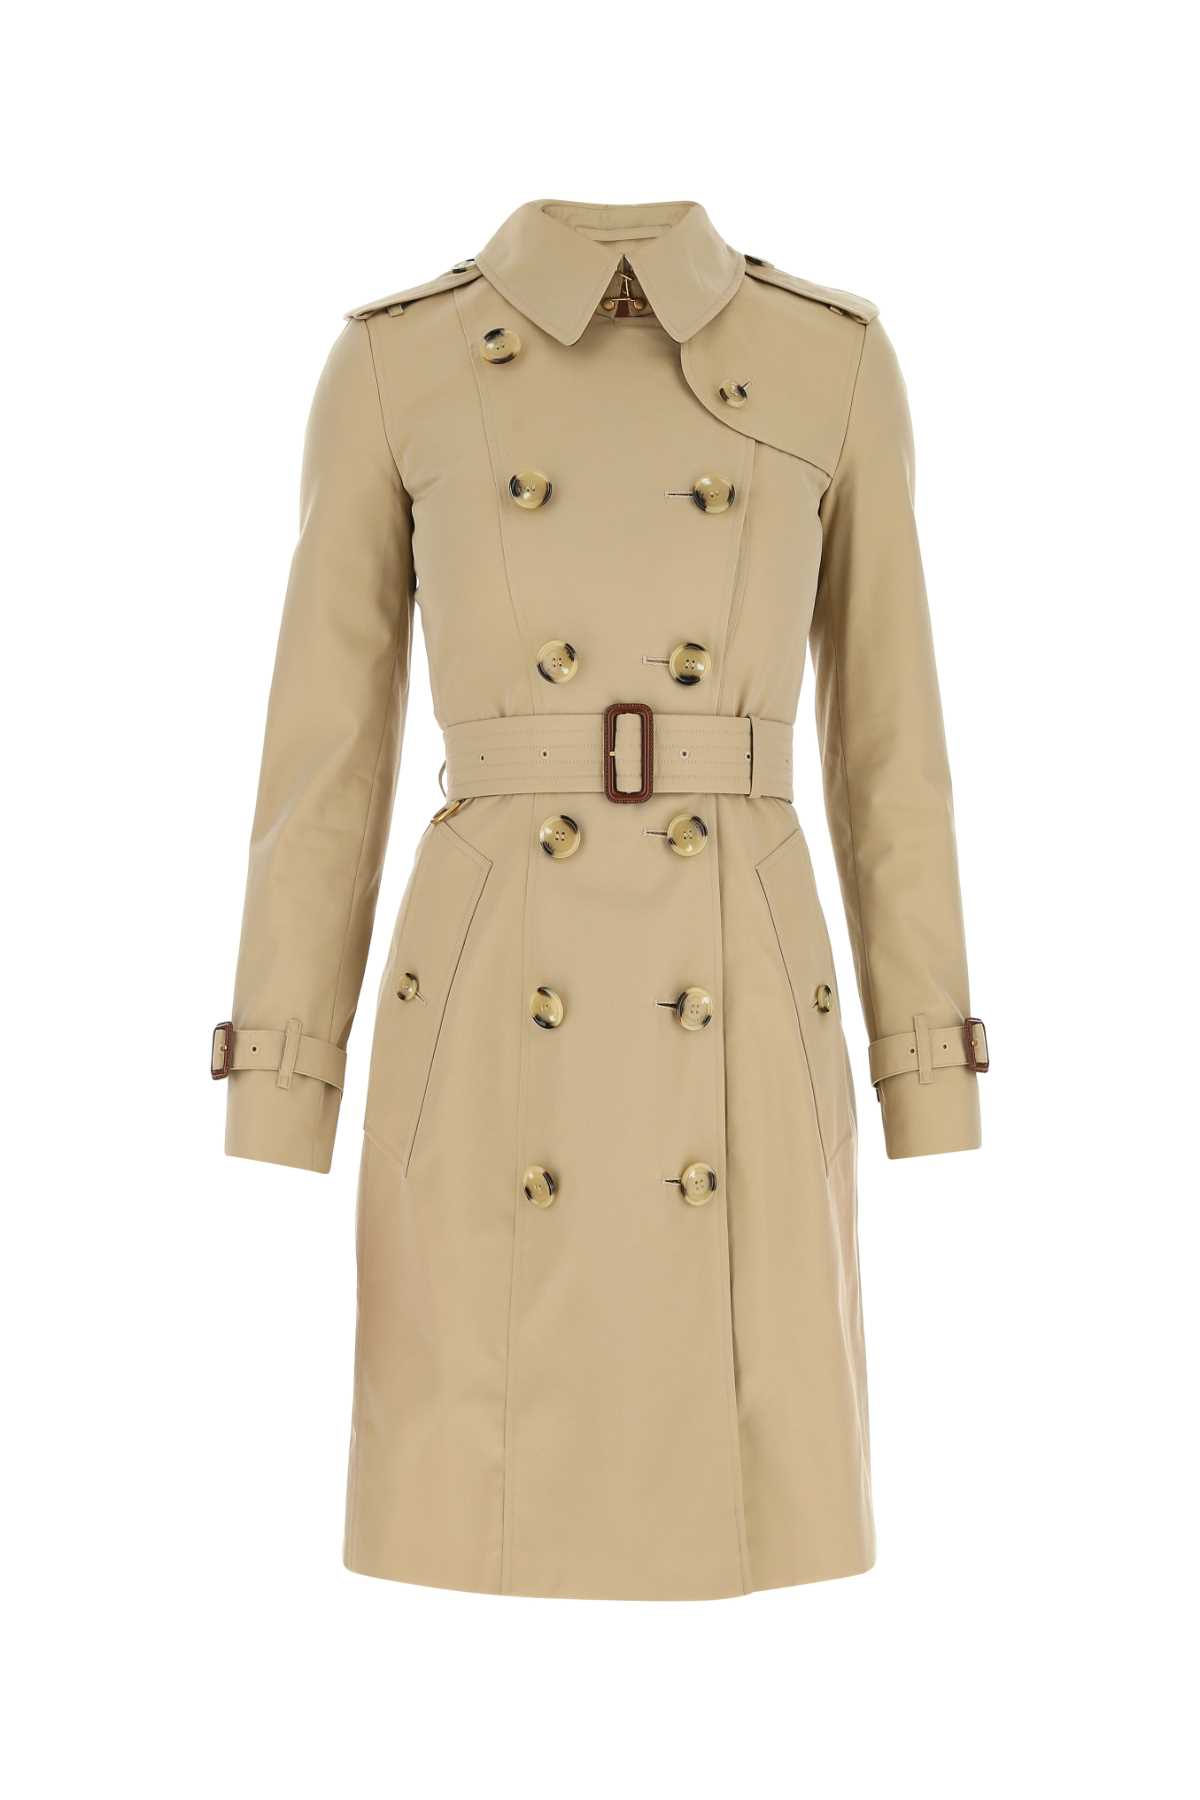 Burberry Cappuccino Cotton Trench Coat In A1366